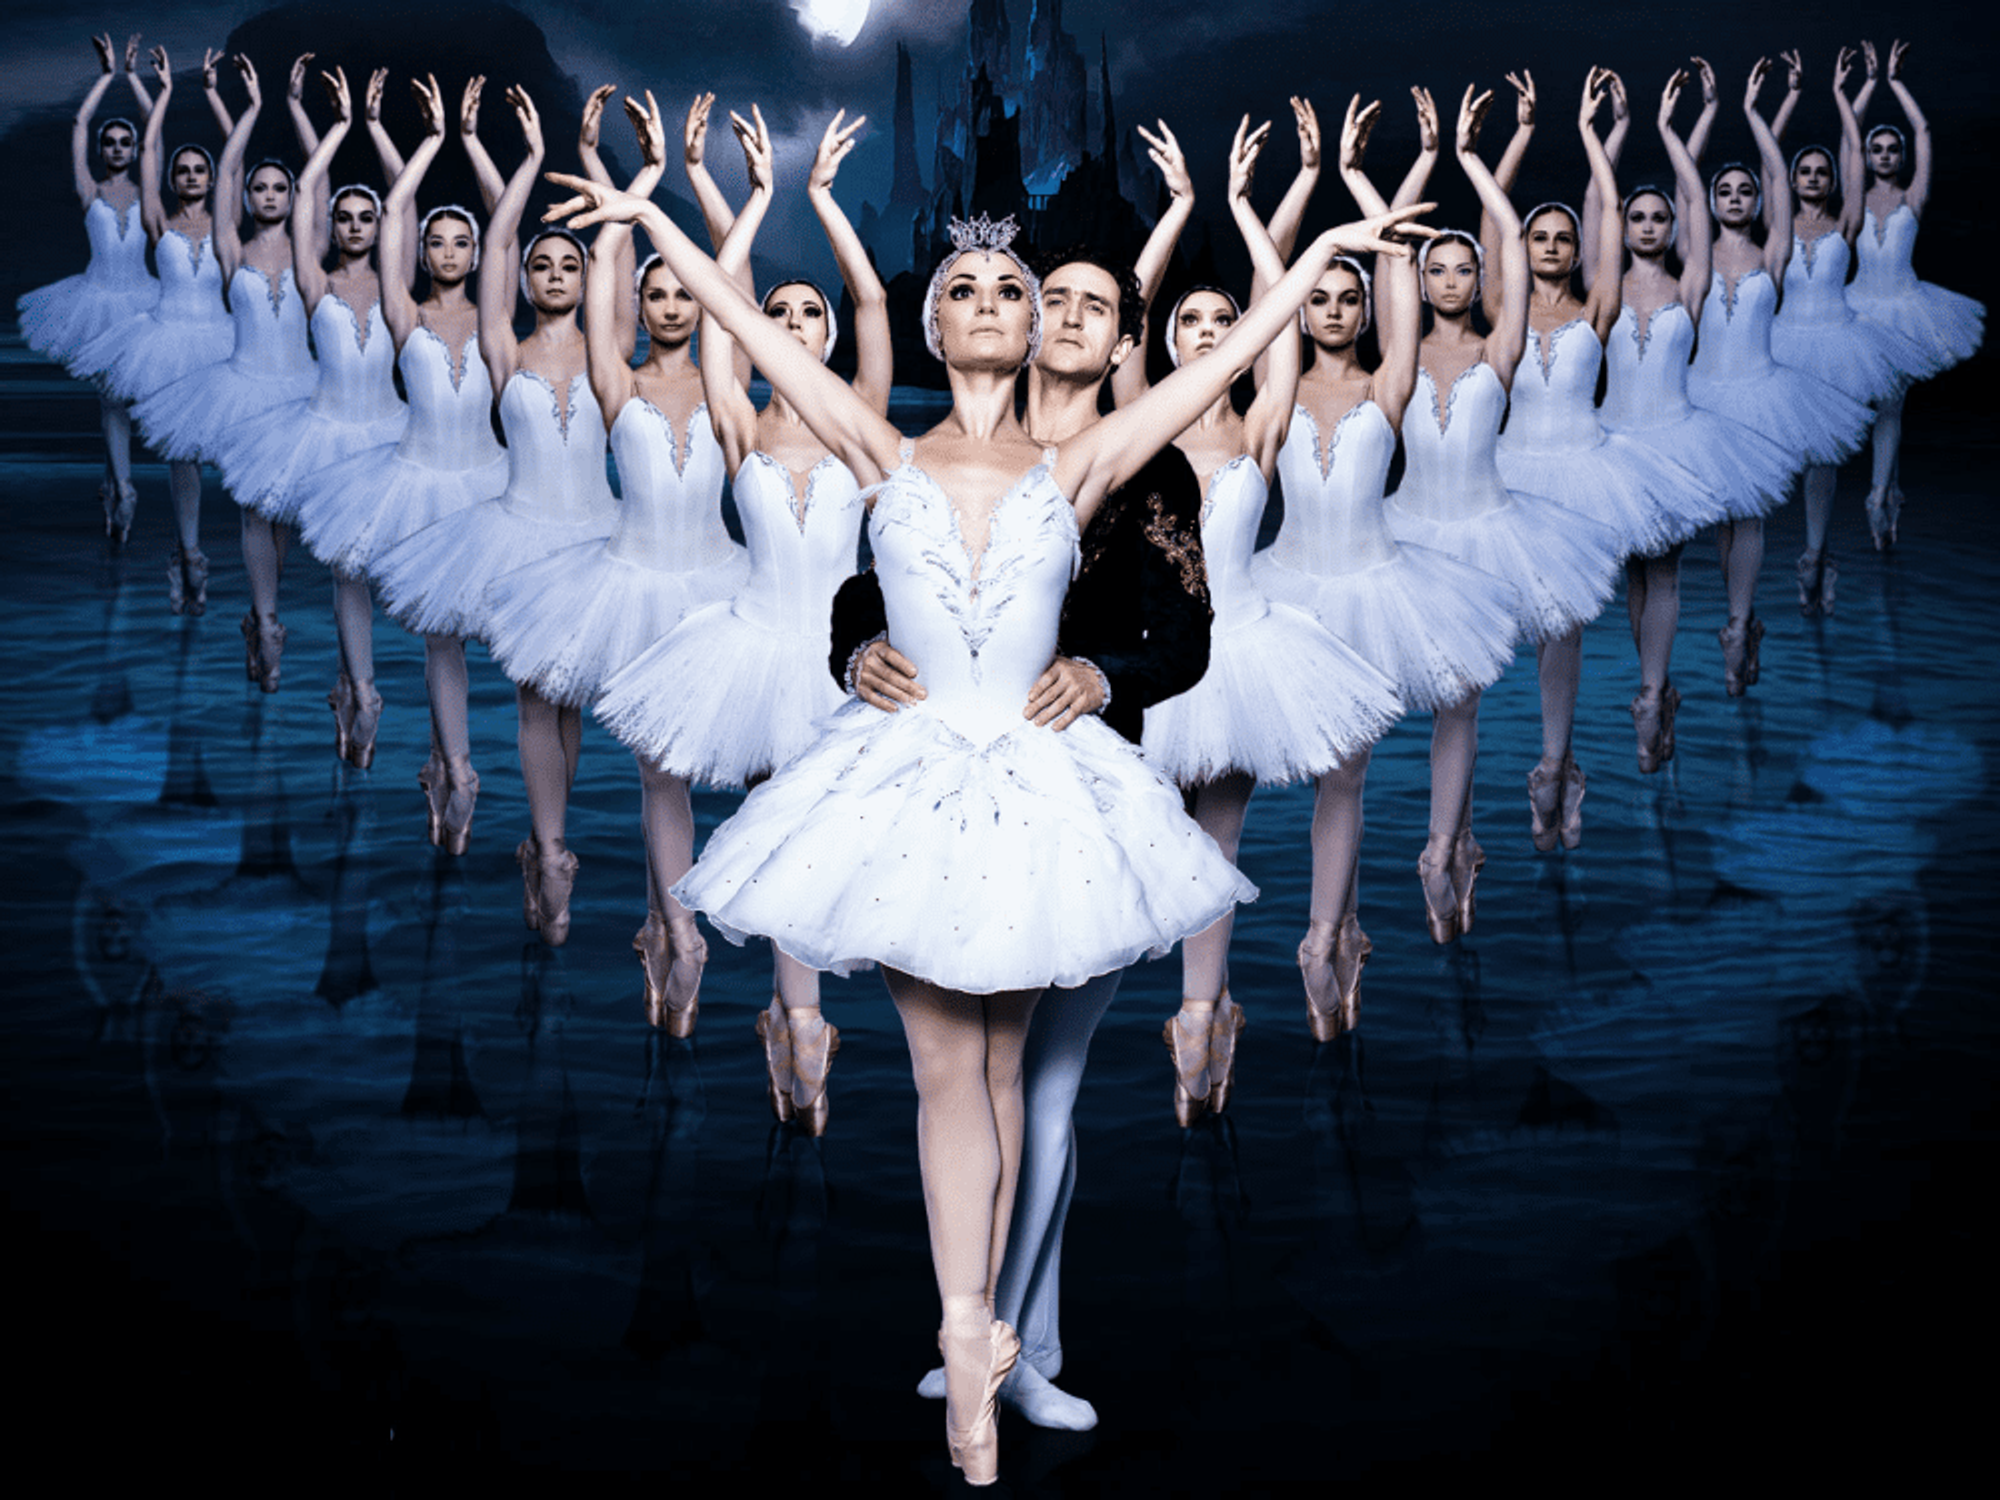 The Russian Ballet brings Swan Lake to the Majestic Theatre this Thursday.